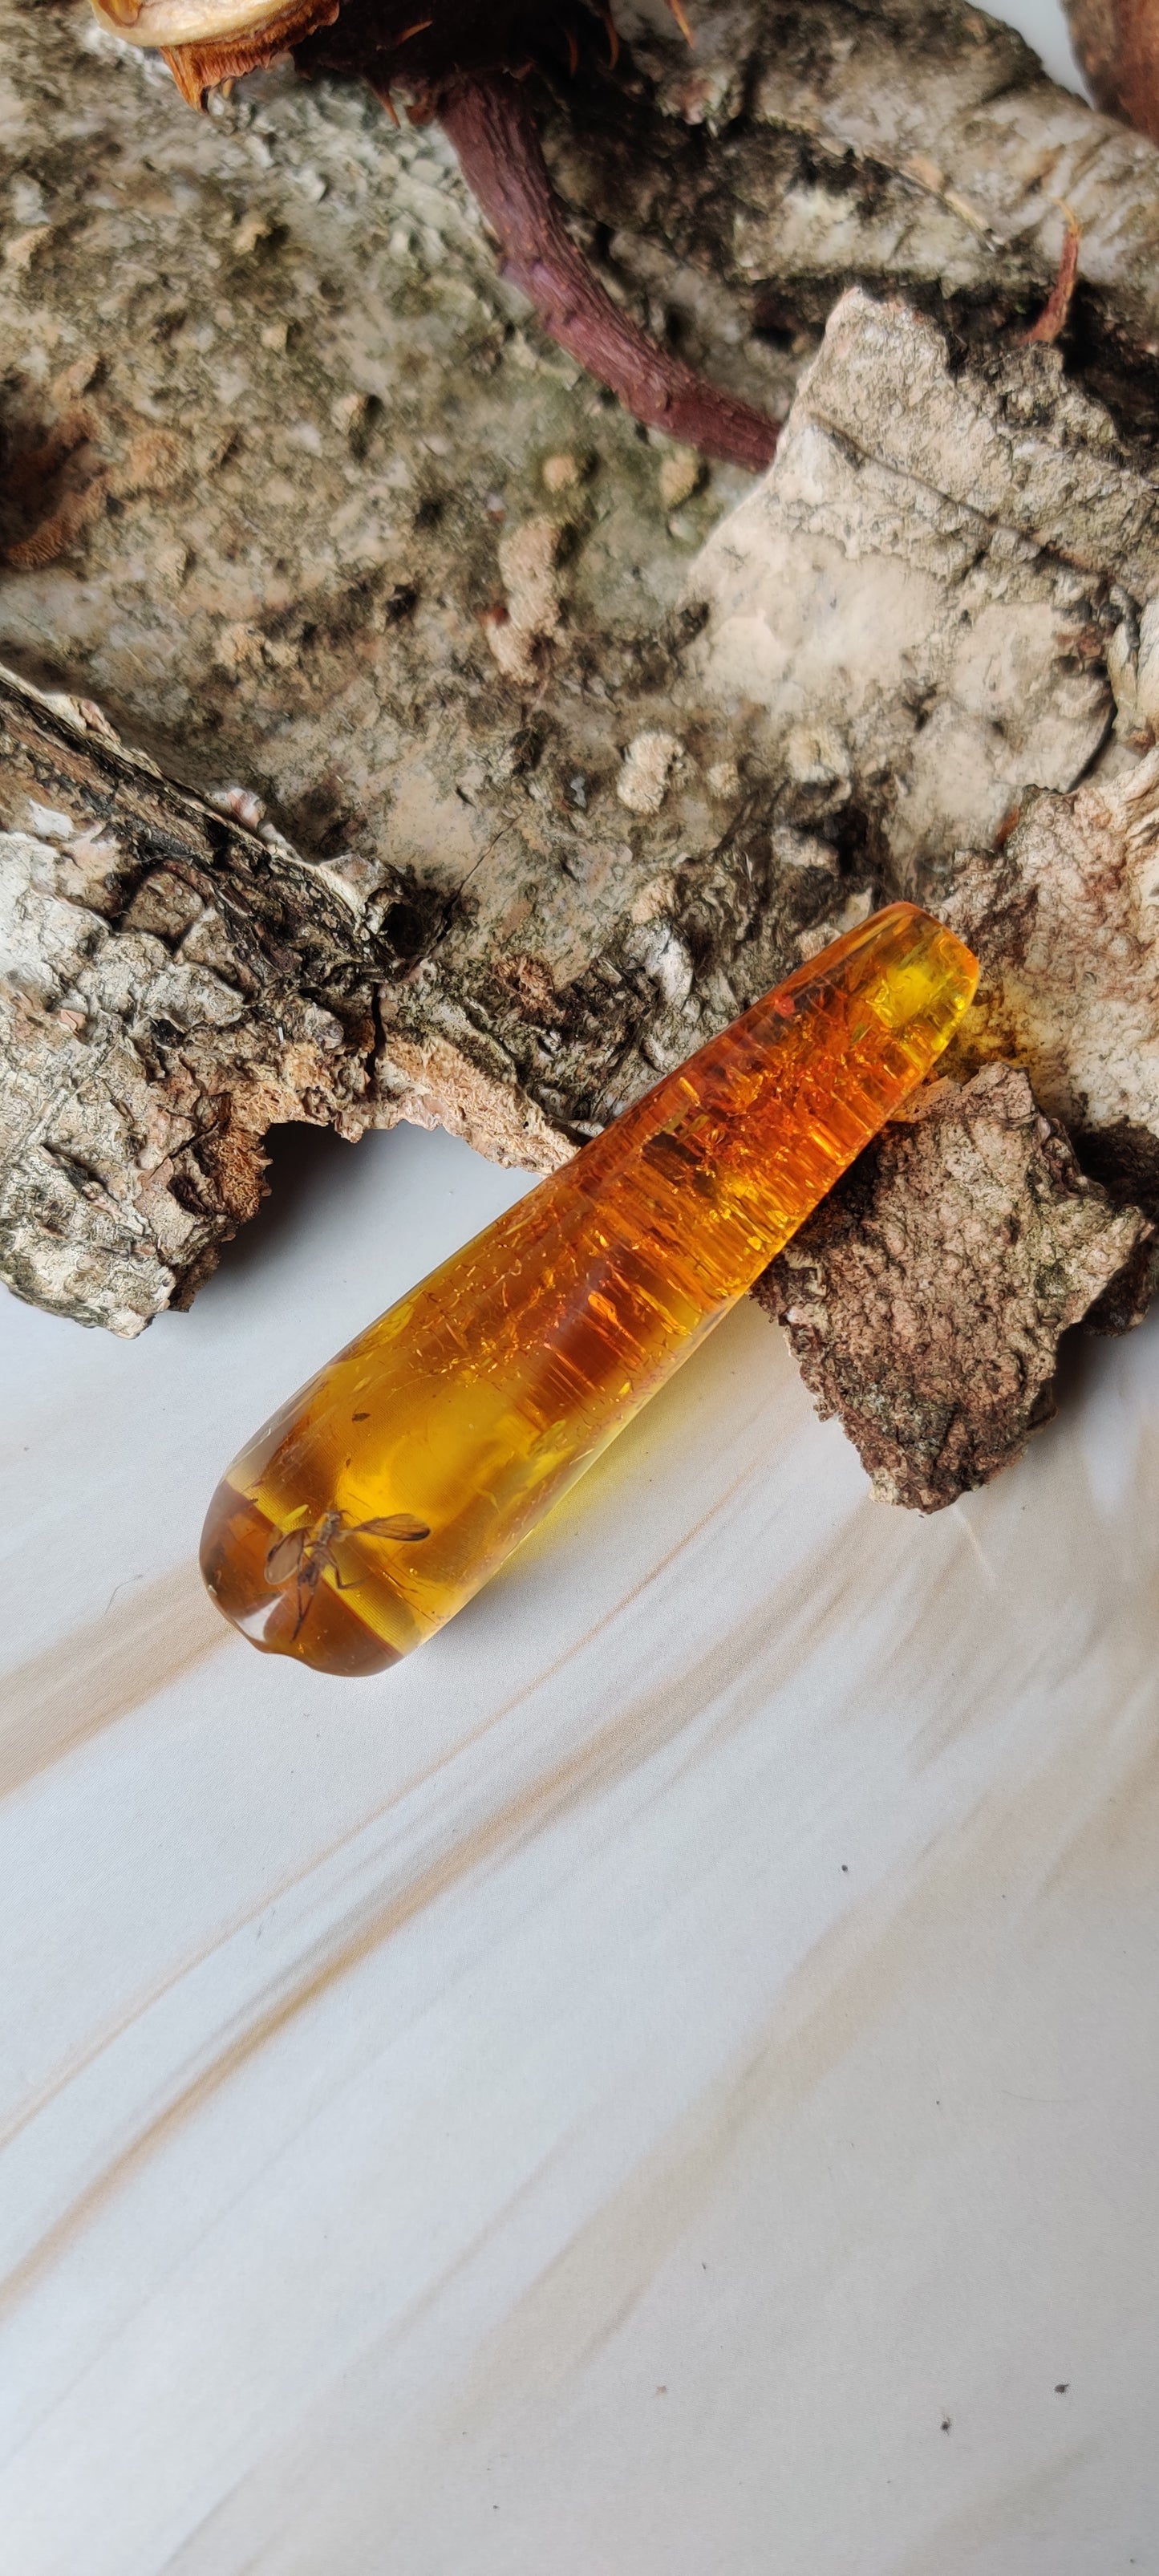 Rare Amber Piece with Insect Inclusion - Mosquito